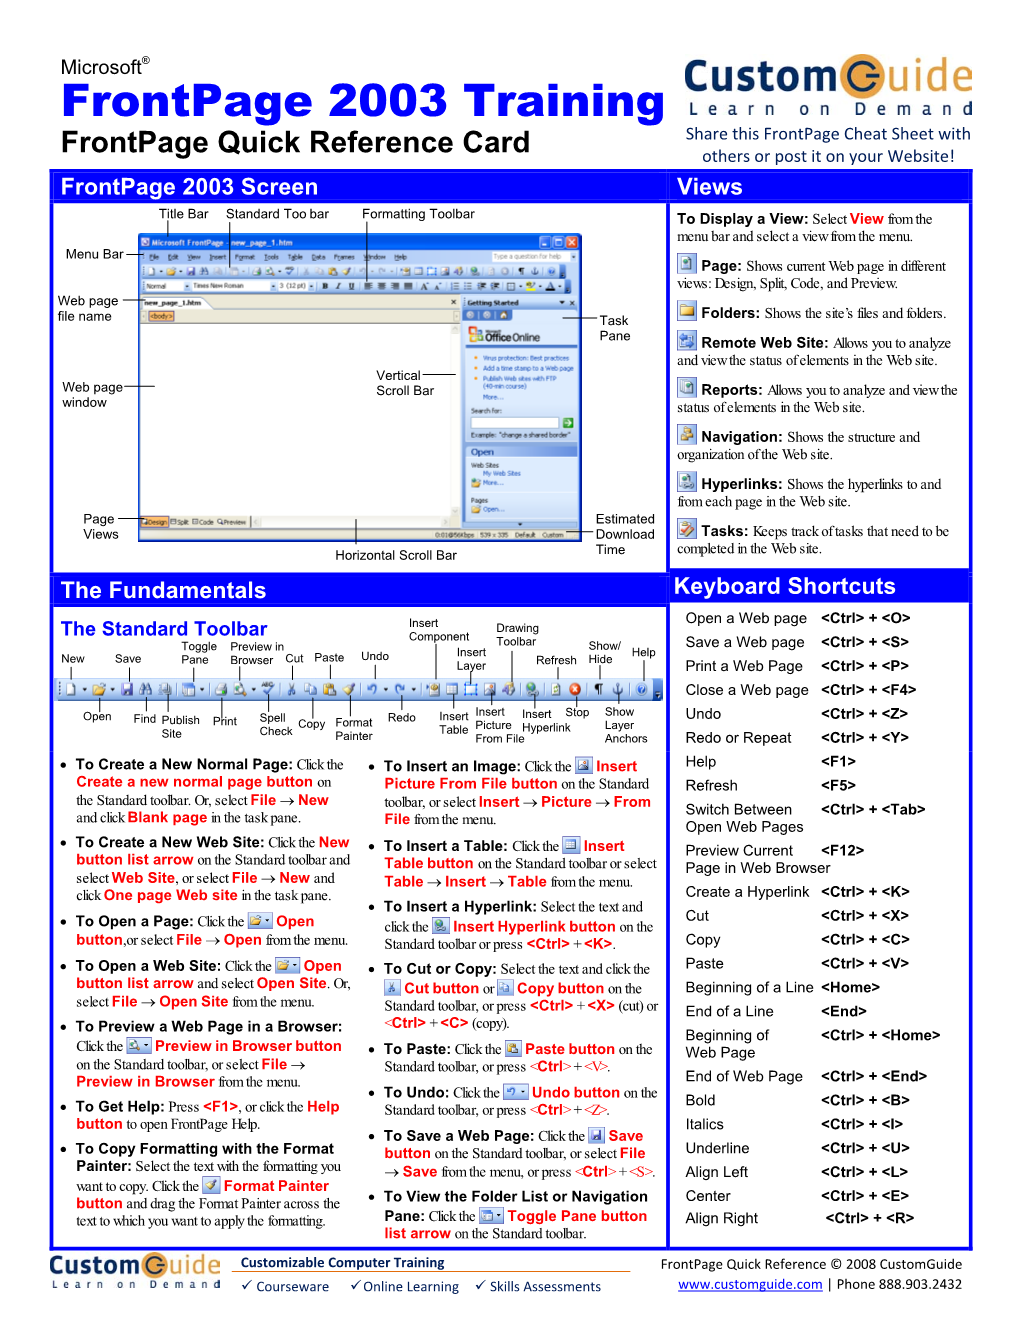 Frontpage Quick Reference, Microsoft Frontpage 2003 Cheat Sheet